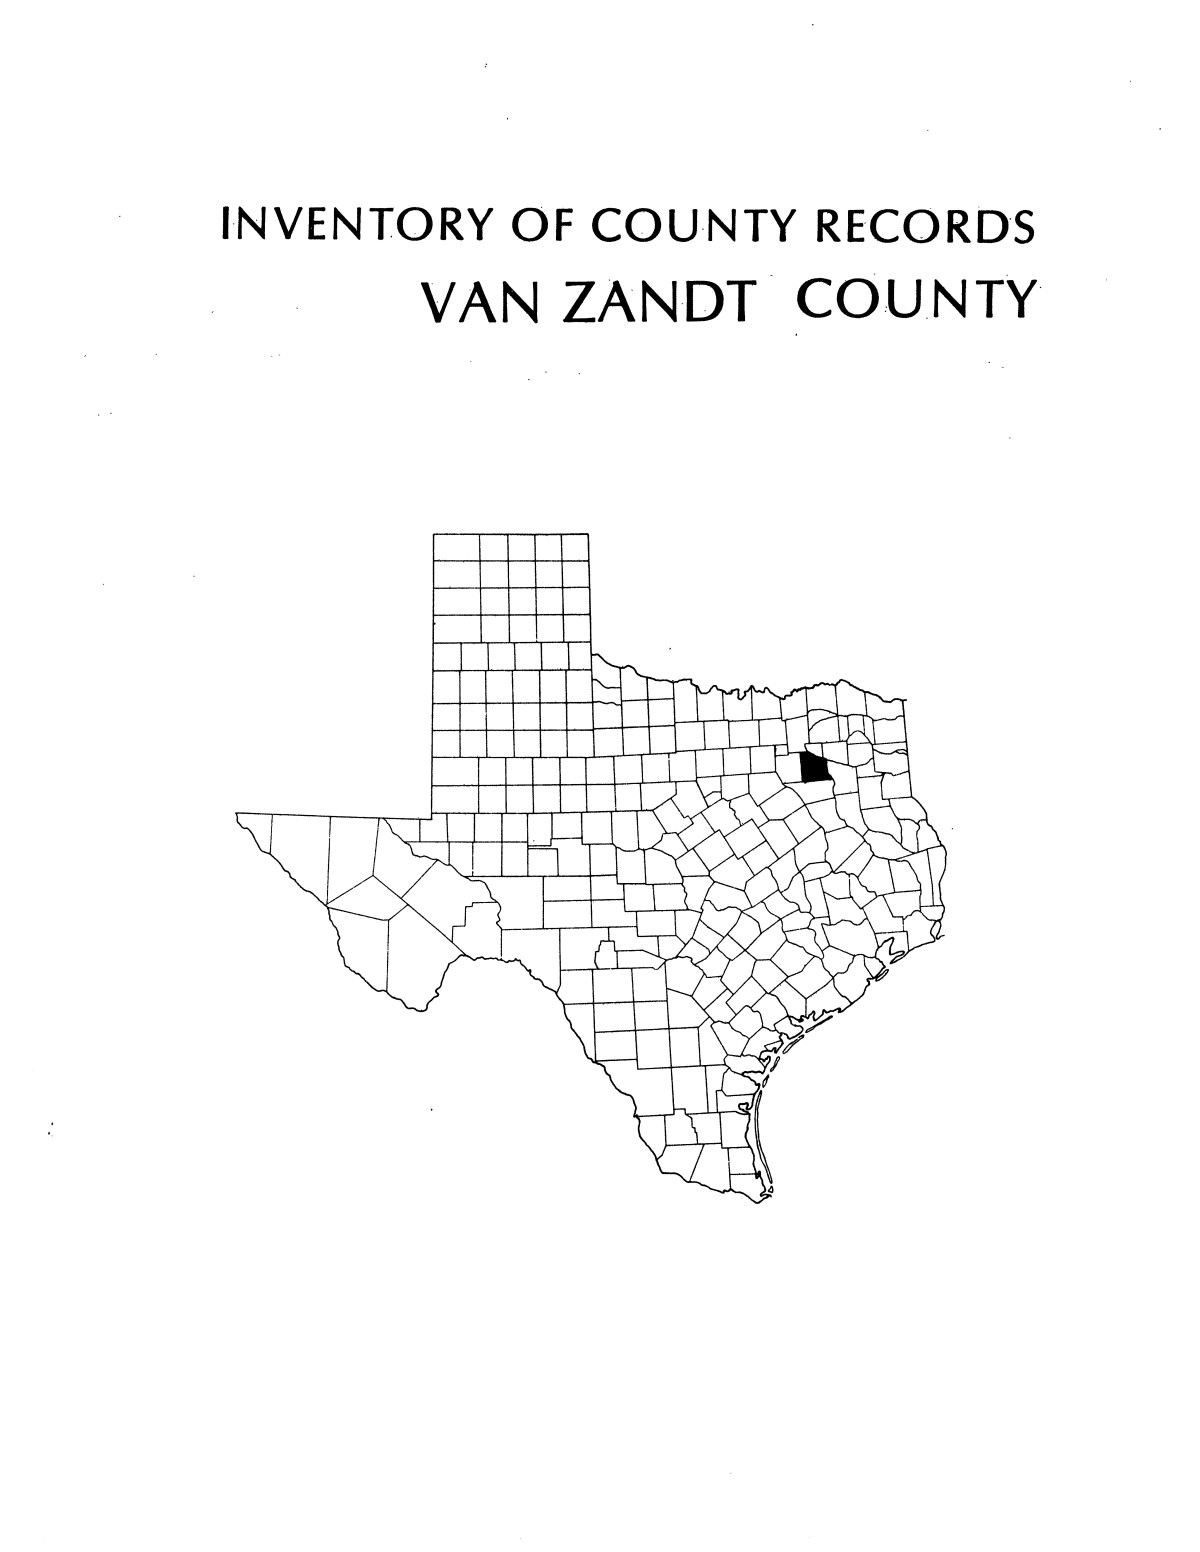 Inventory of county records Van Zandt County courthouse Canton Texas